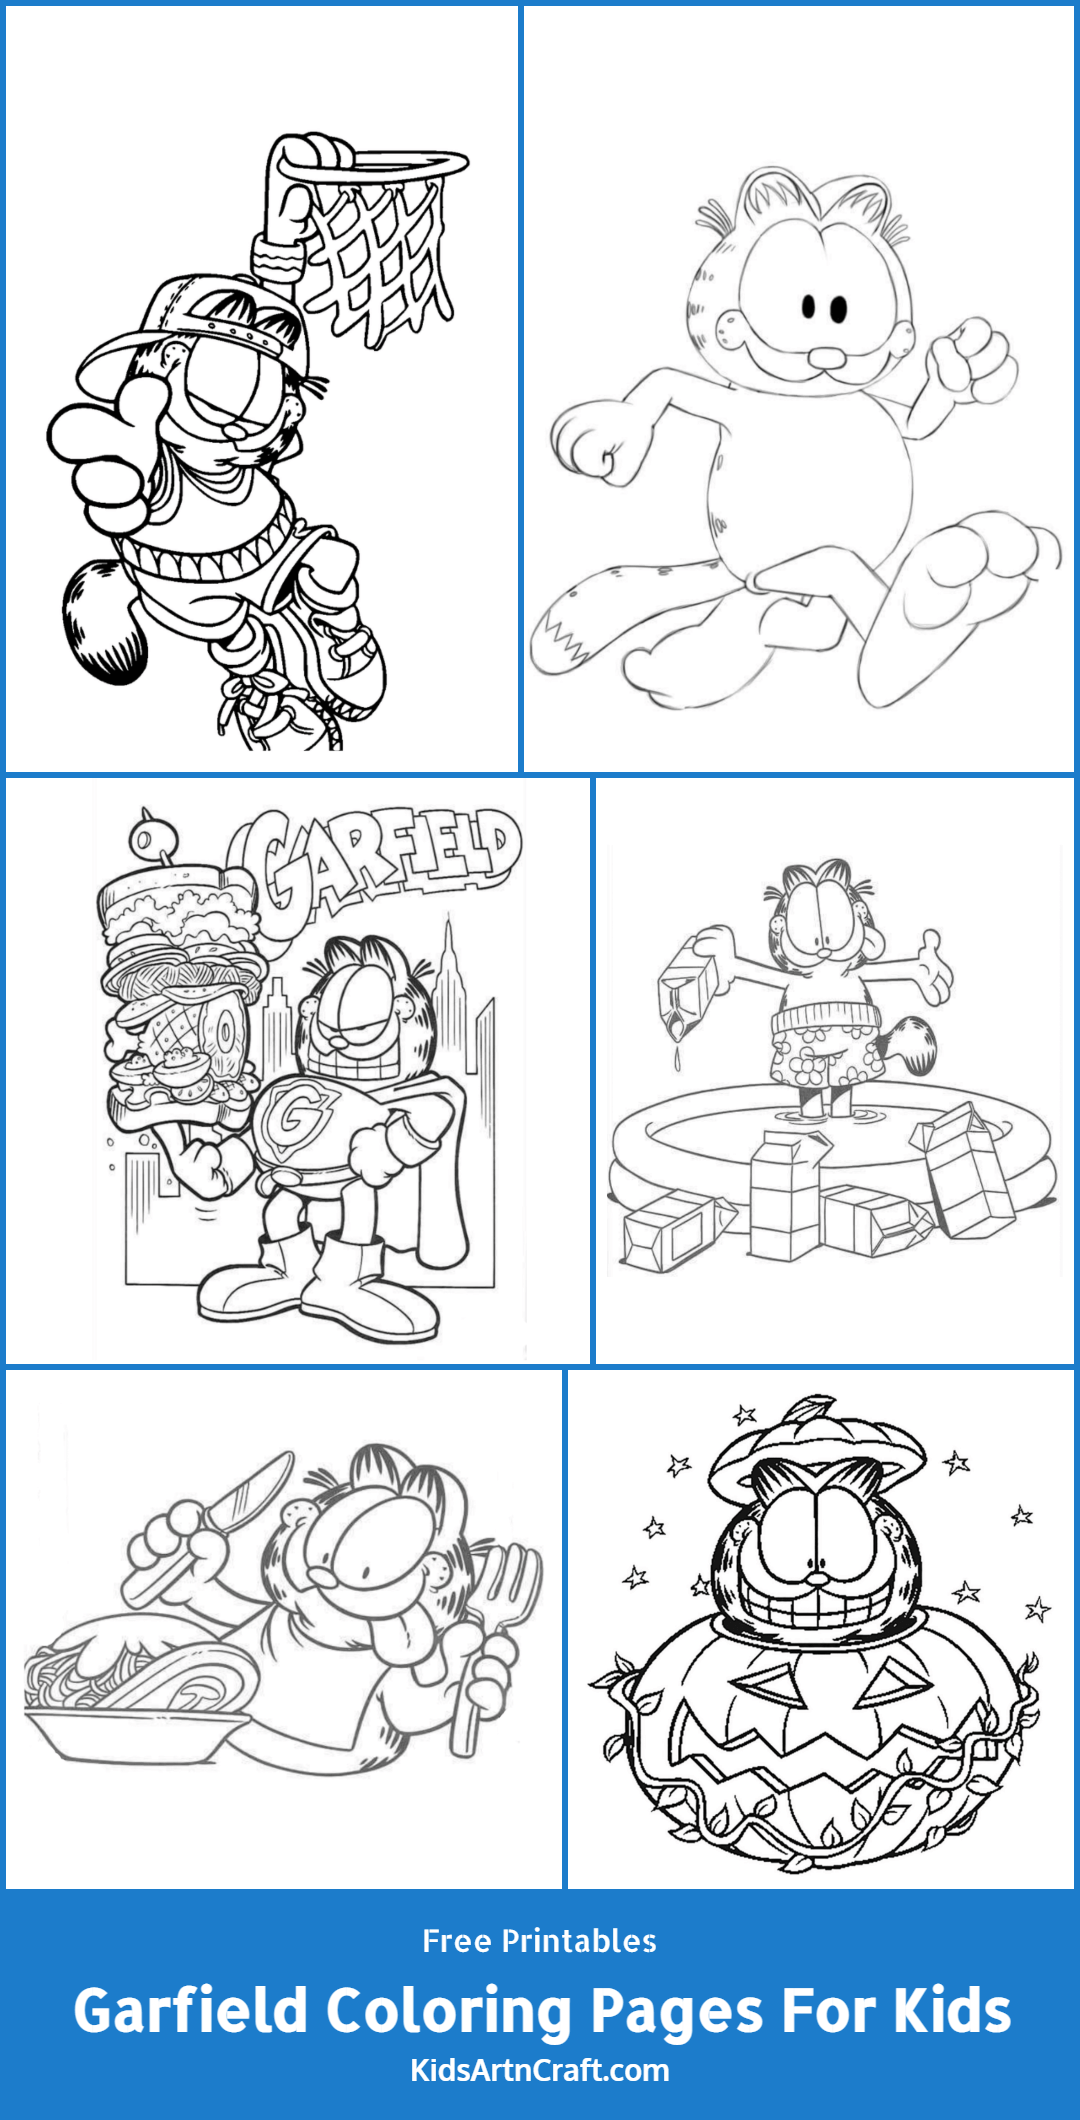 Garfield Coloring Pages For Kids – Free Printables